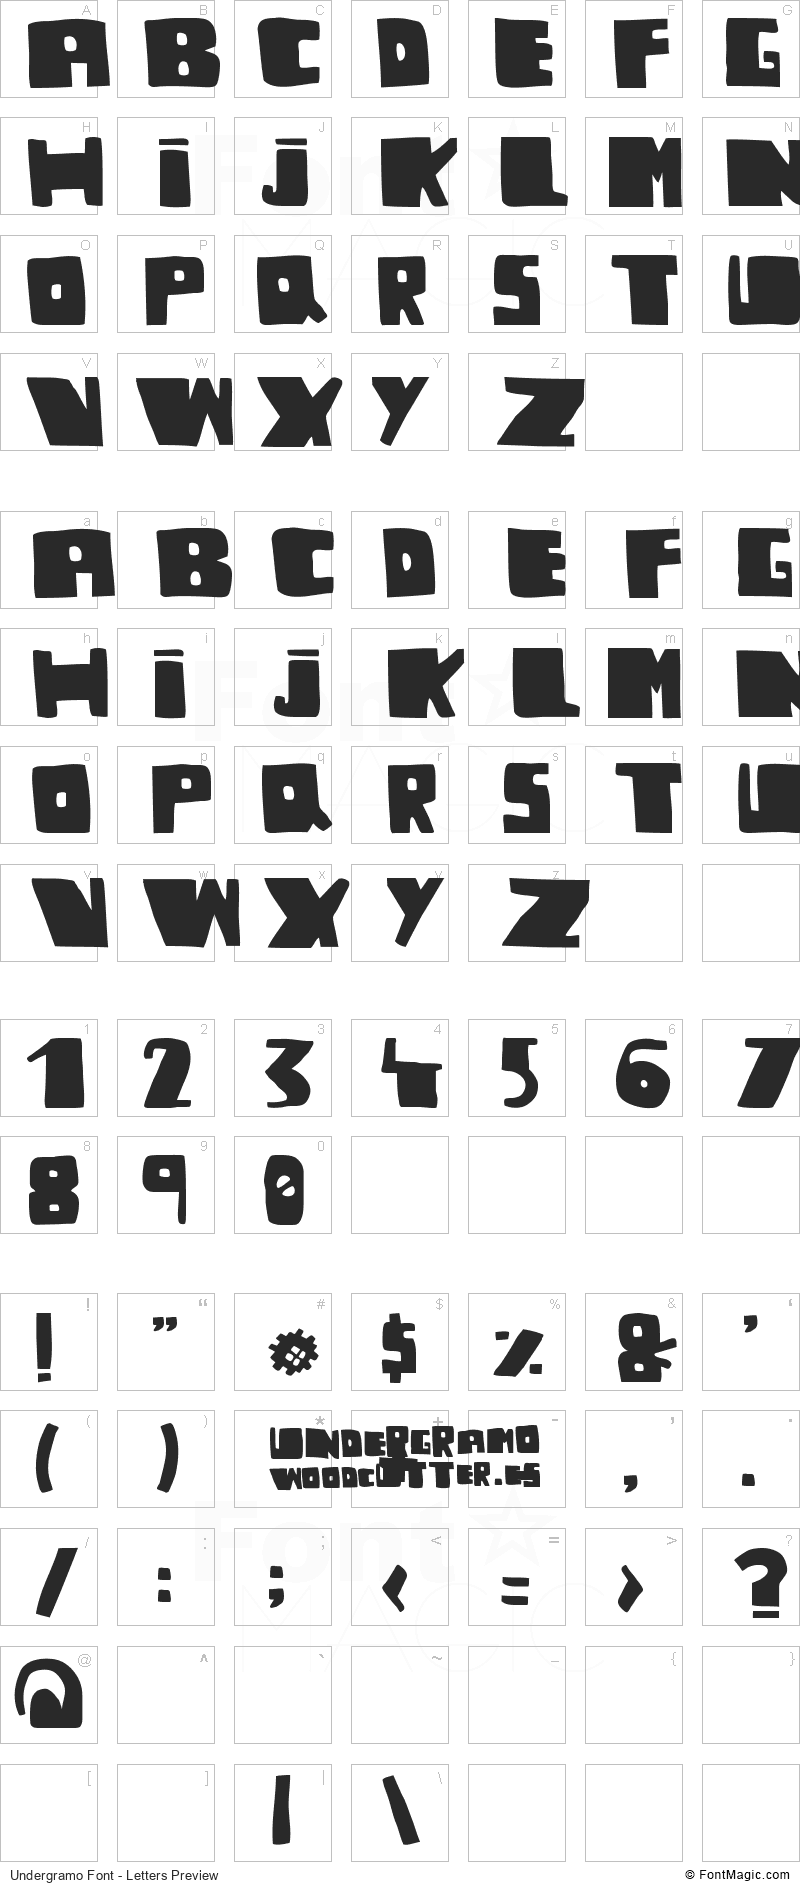 Undergramo Font - All Latters Preview Chart